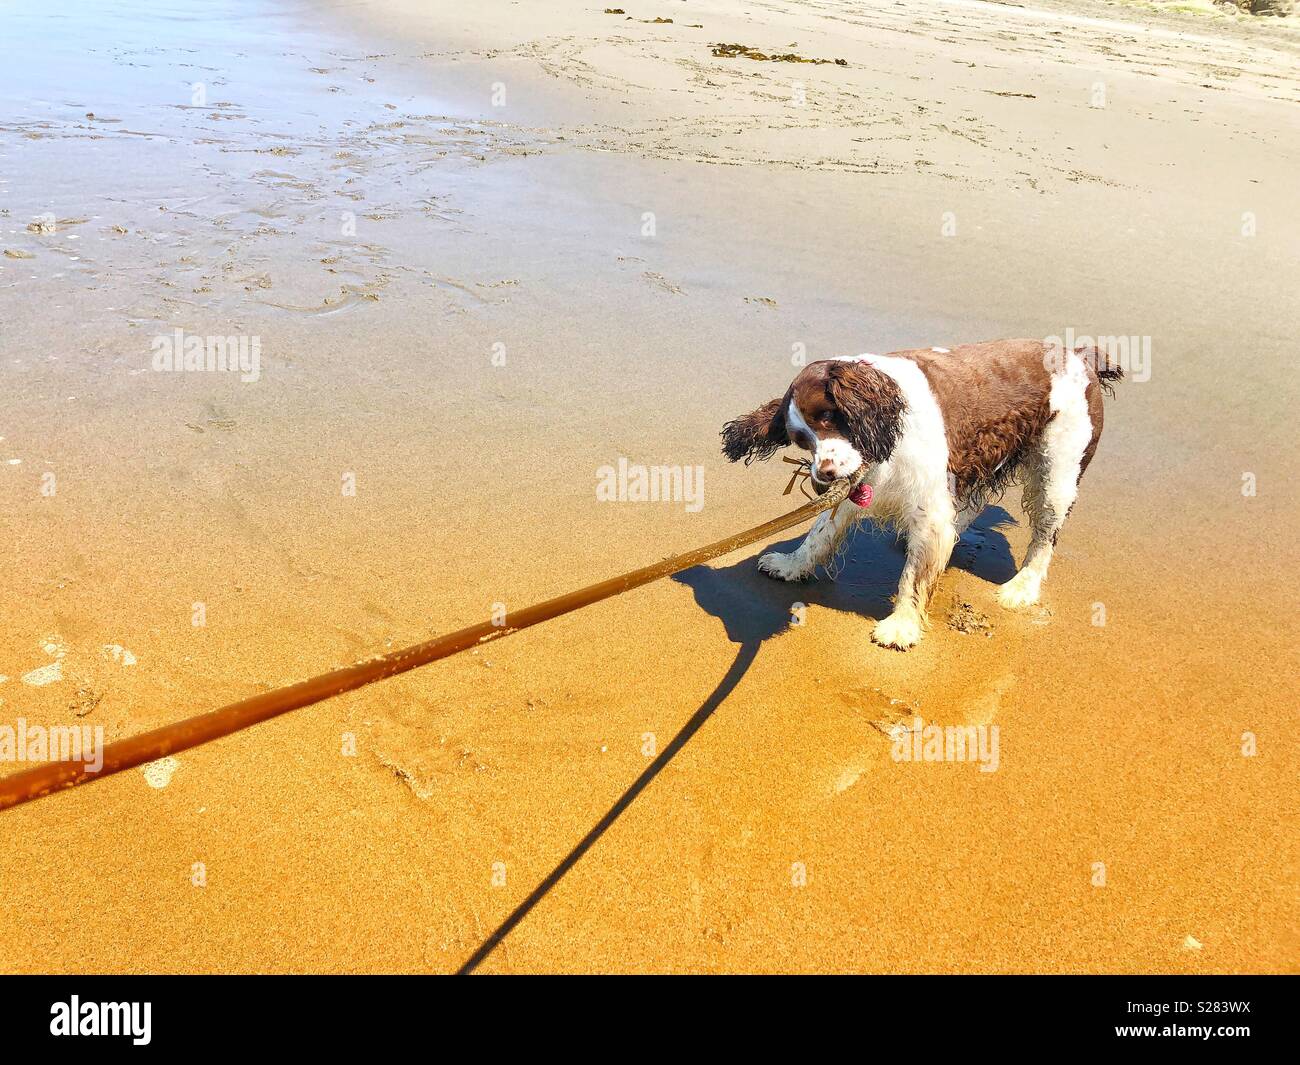 Floppy ears English Springer Spaniel puppy dog playing tug of war with a long vine of Pacific bull kelp at a golden sand beach in California under sunny skies Stock Photo